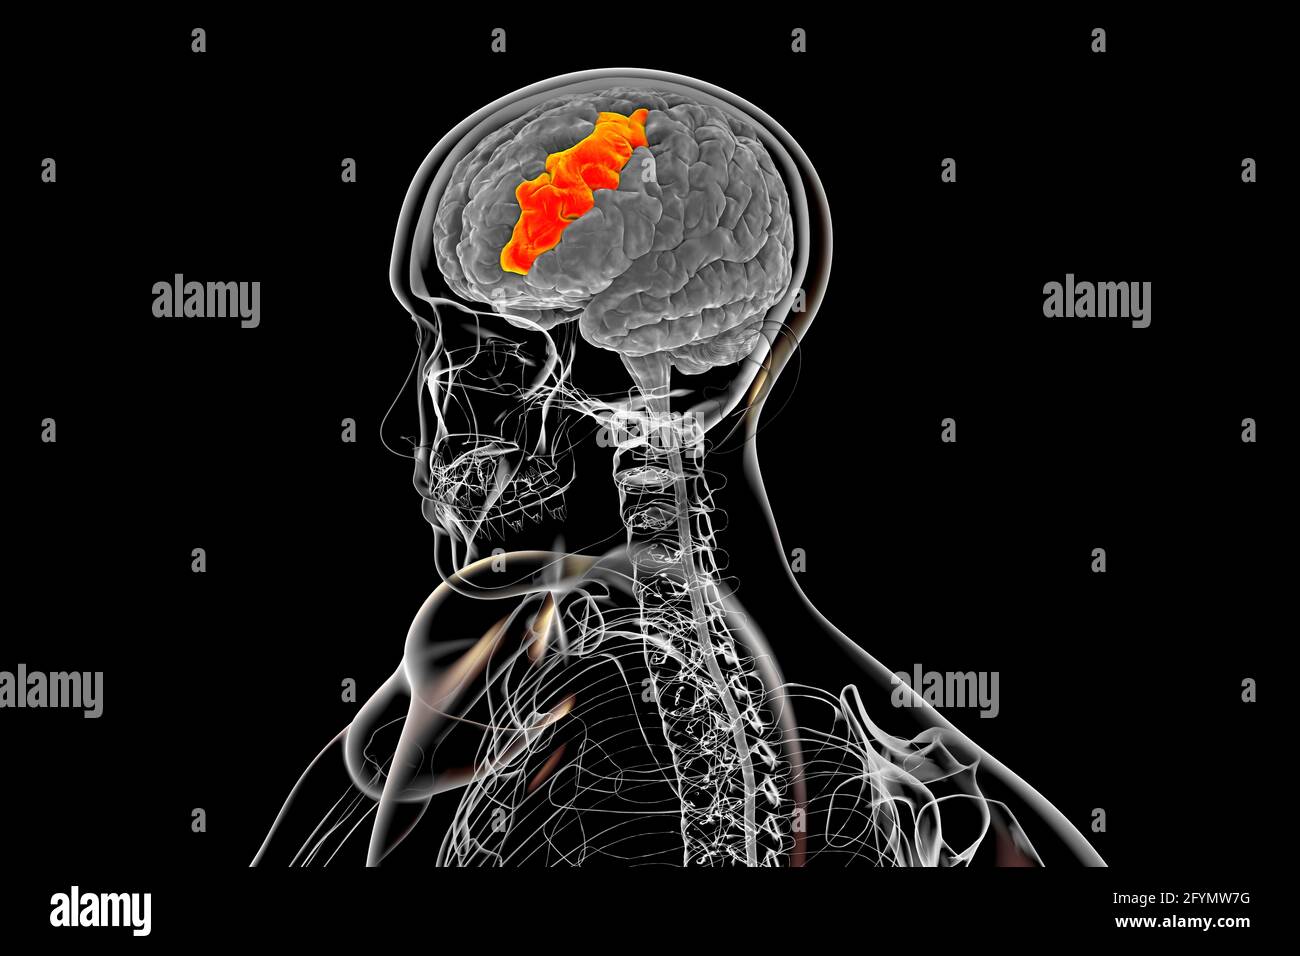 Brain with highlighted middle frontal gyrus, illustration Stock Photo